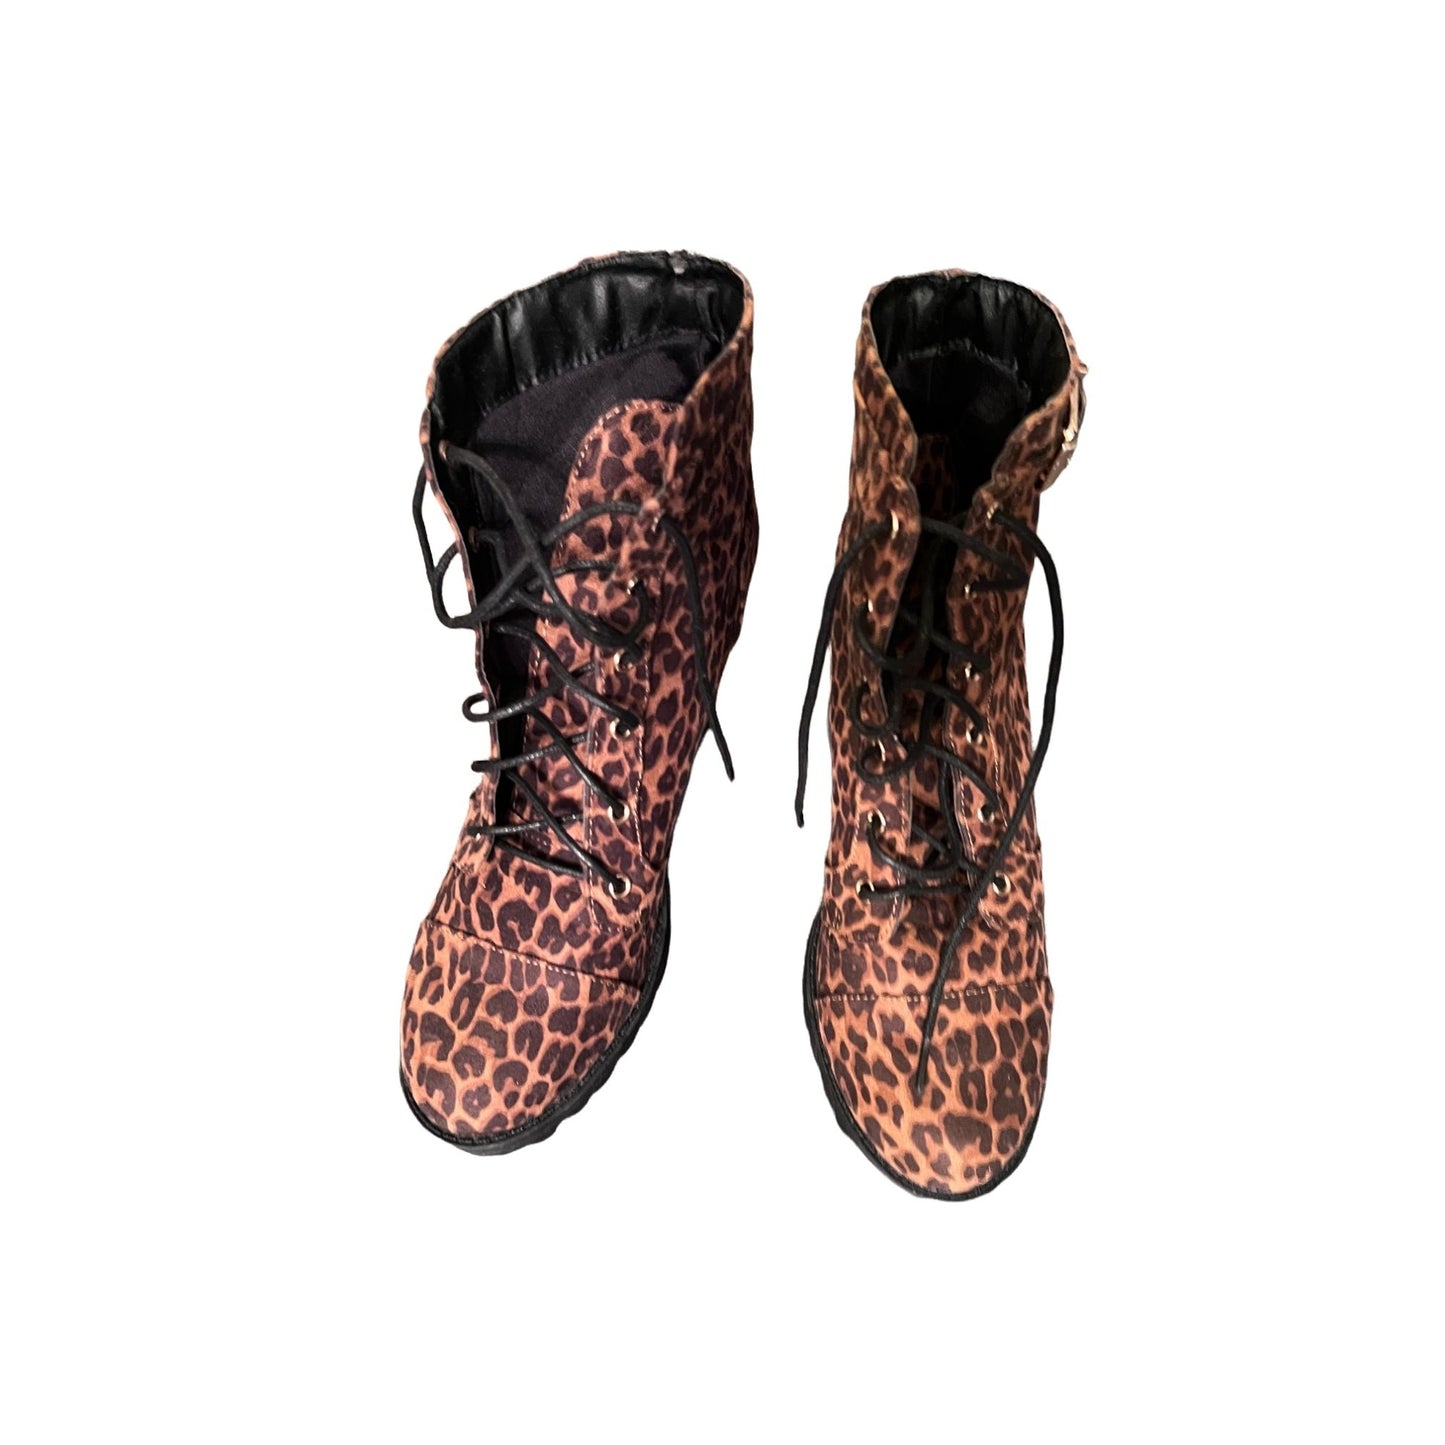 Leopard Lace-up Heeled Boots - 9